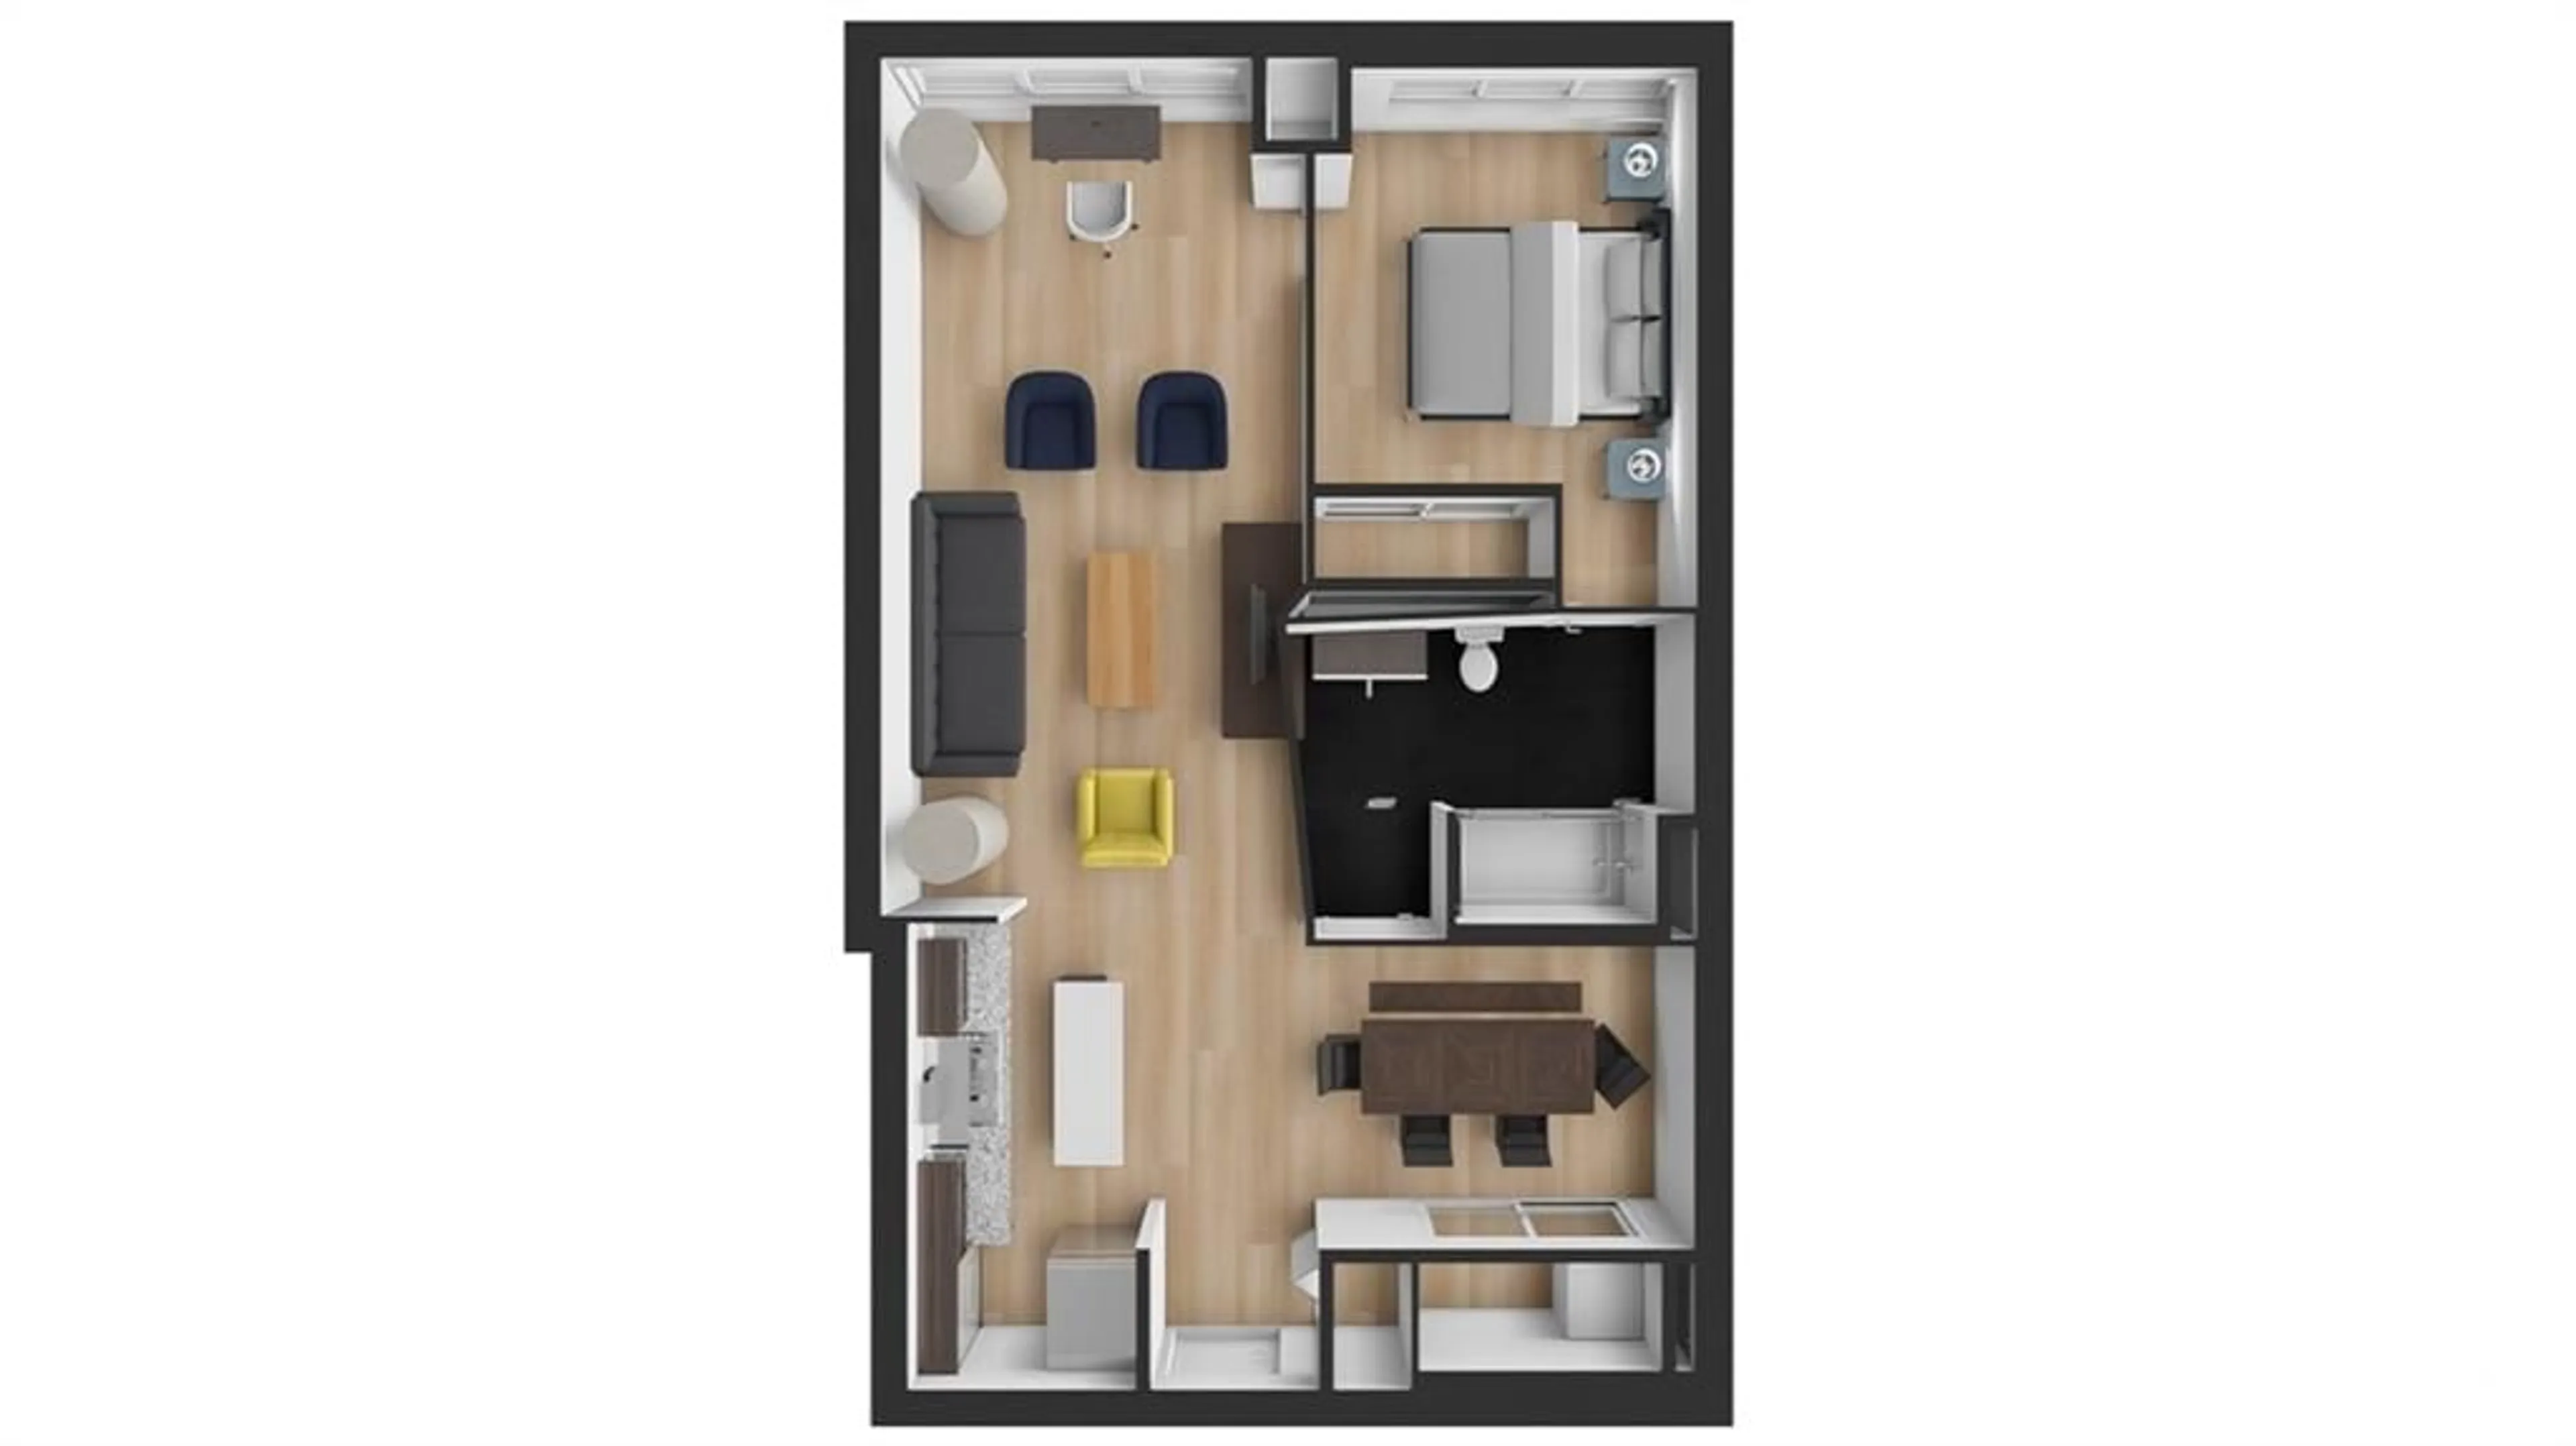 Floor plan for 324 LAURIER Ave #1908, Ottawa Ontario K1P 0A4